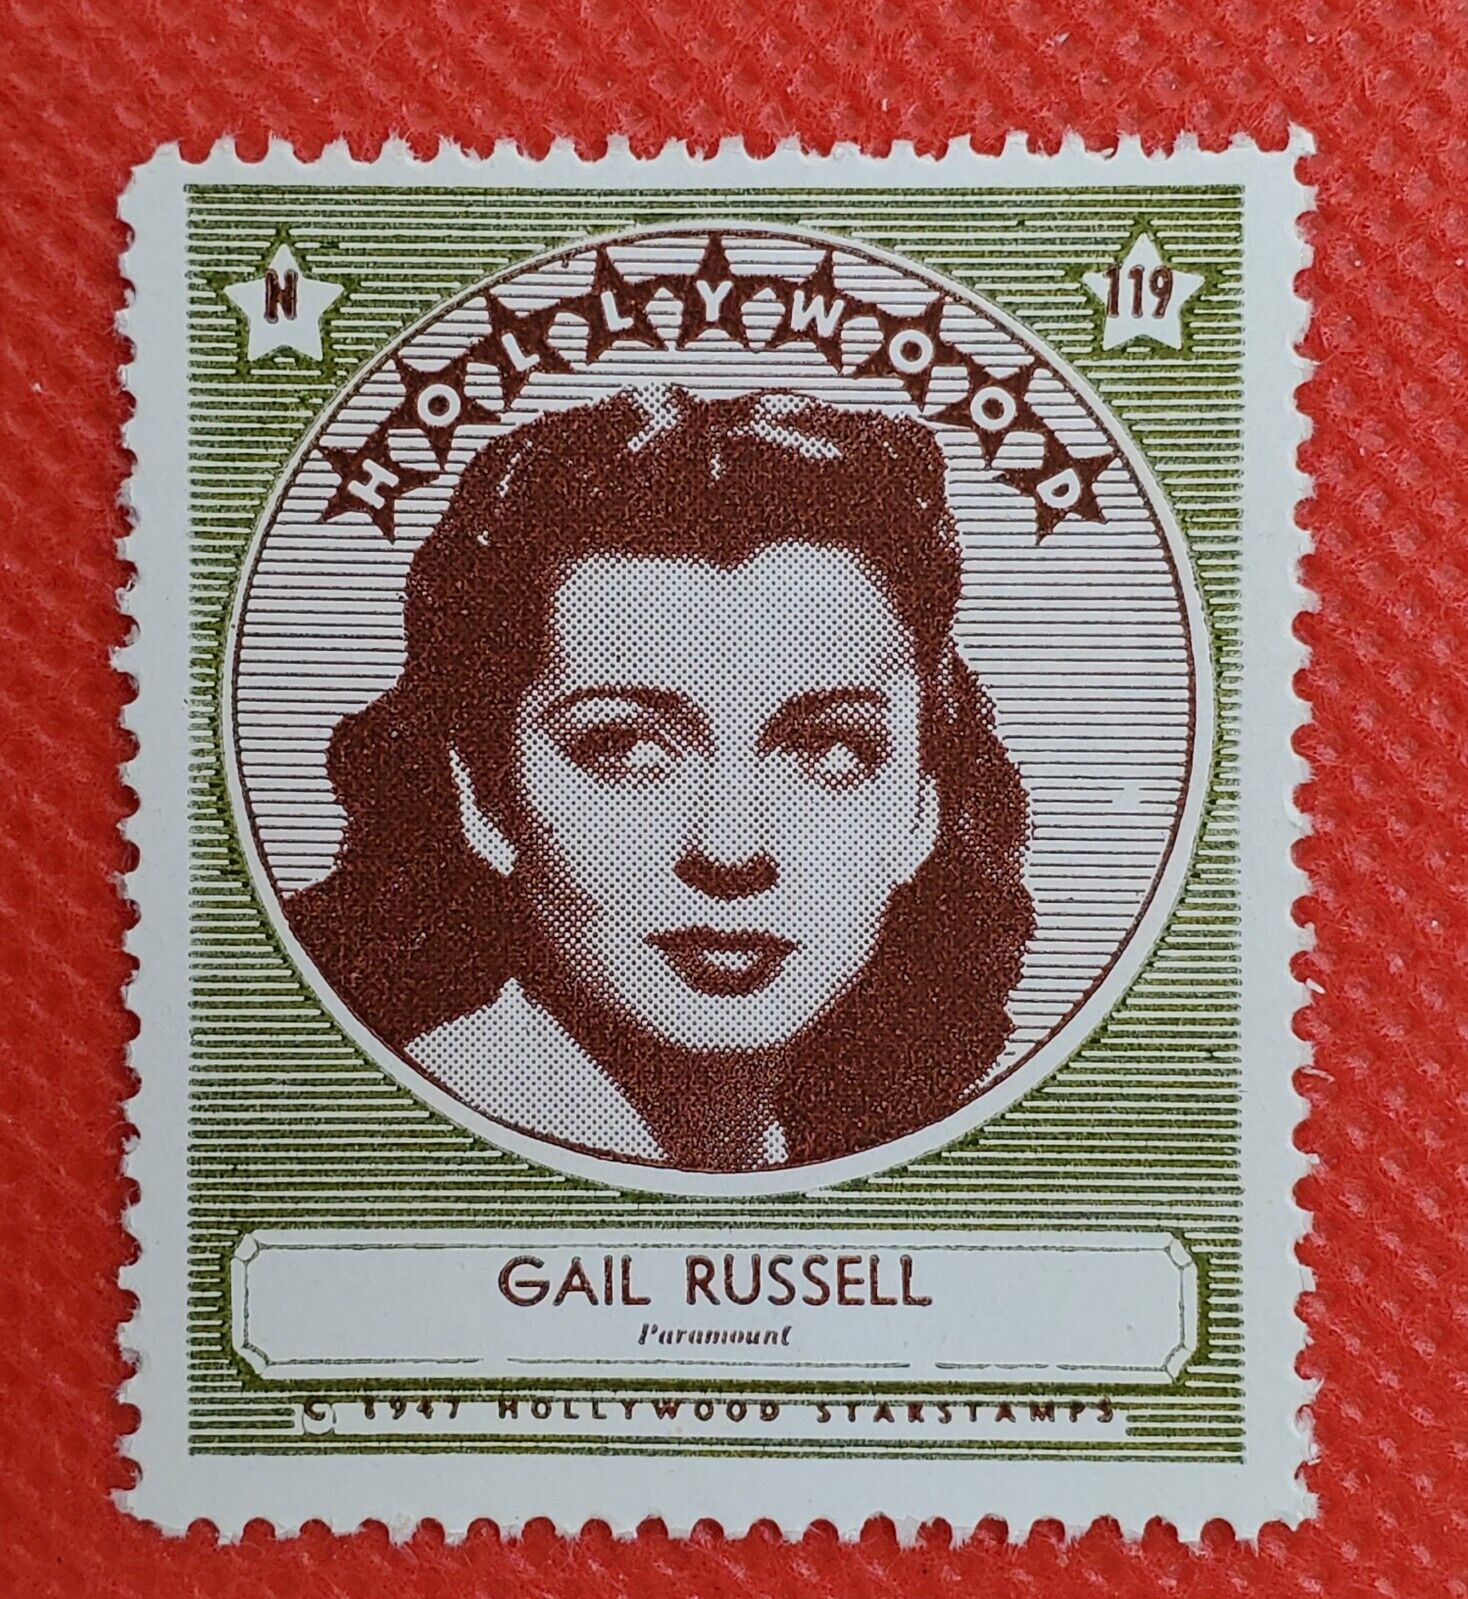 Gail Russell 1947 Hollywood Screen Movie Stars Stamp Trading Card